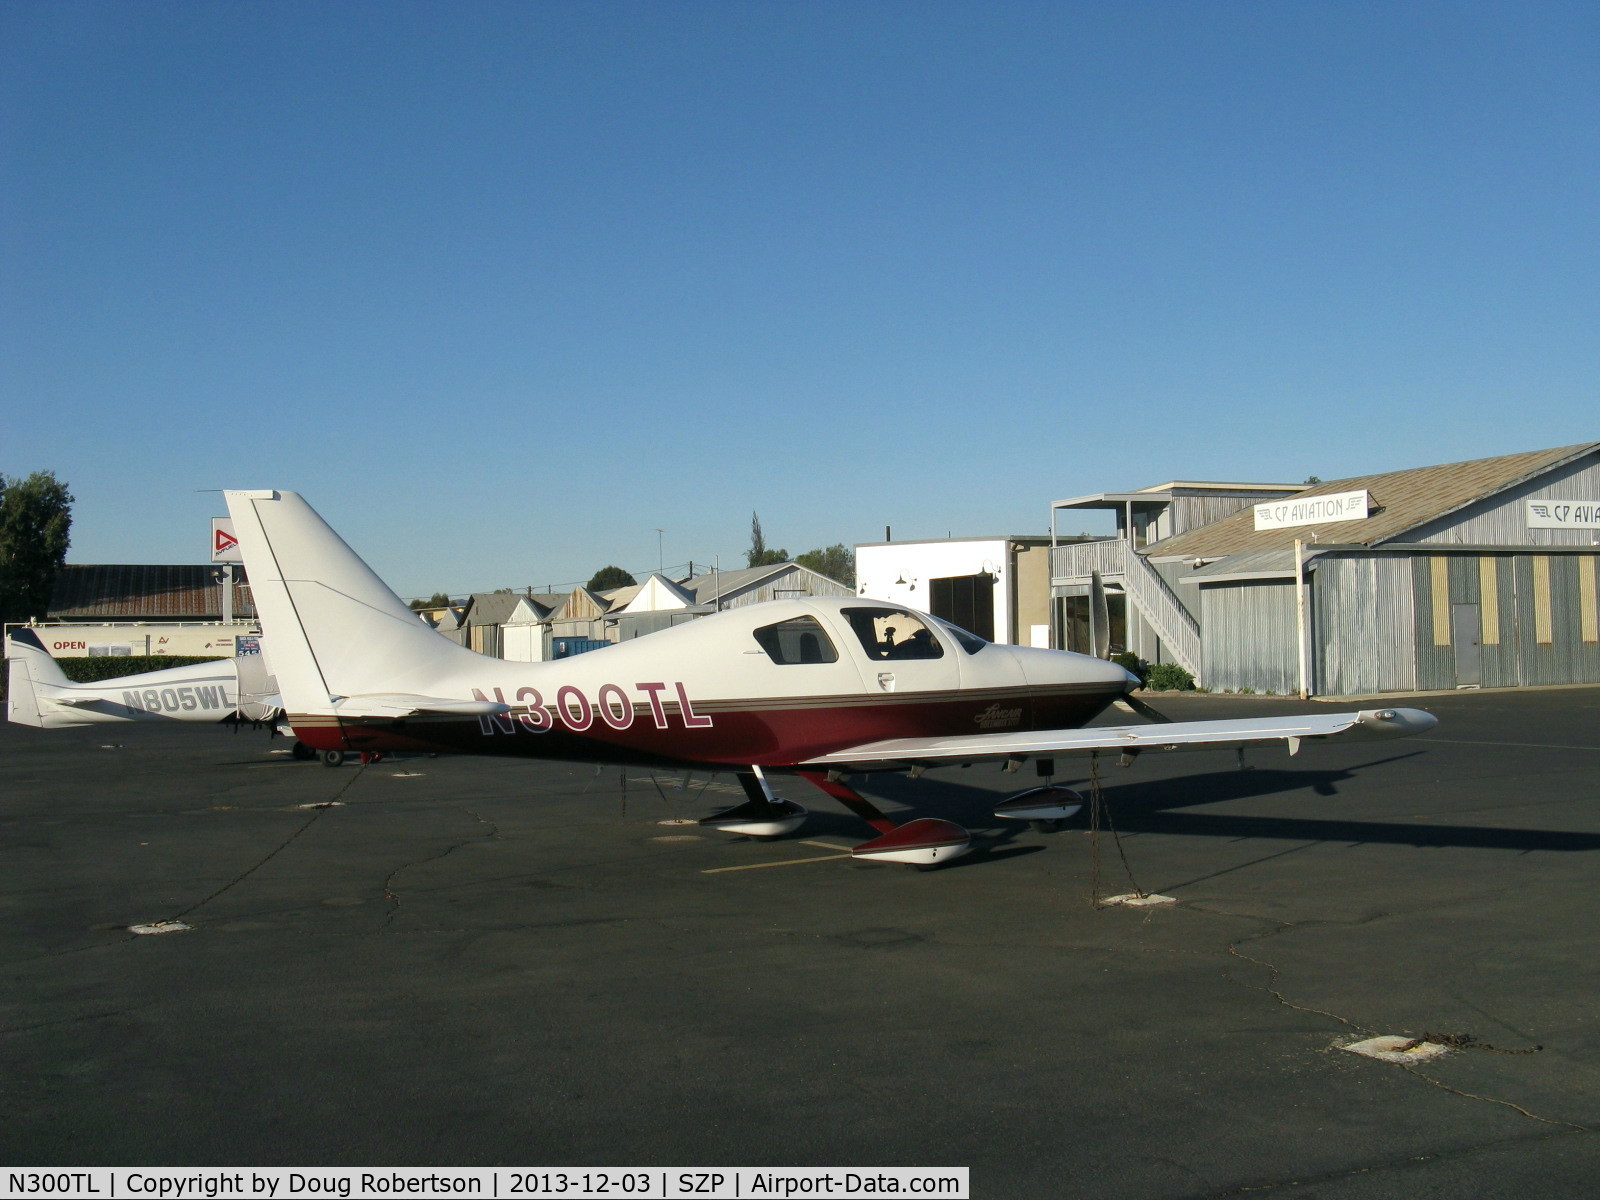 N300TL, 2003 Lancair LC-40-550FG C/N 40067, 2003 Lancair LC-40-550FG COLUMBIA 300 TOURER, Continental IO-550-N2B 300 Hp with FADEC, 3-blade CS Hartzell prop, double gull-wing doors, seating certified to 26 g, 106 US gallons, 98 gallons usable fuel